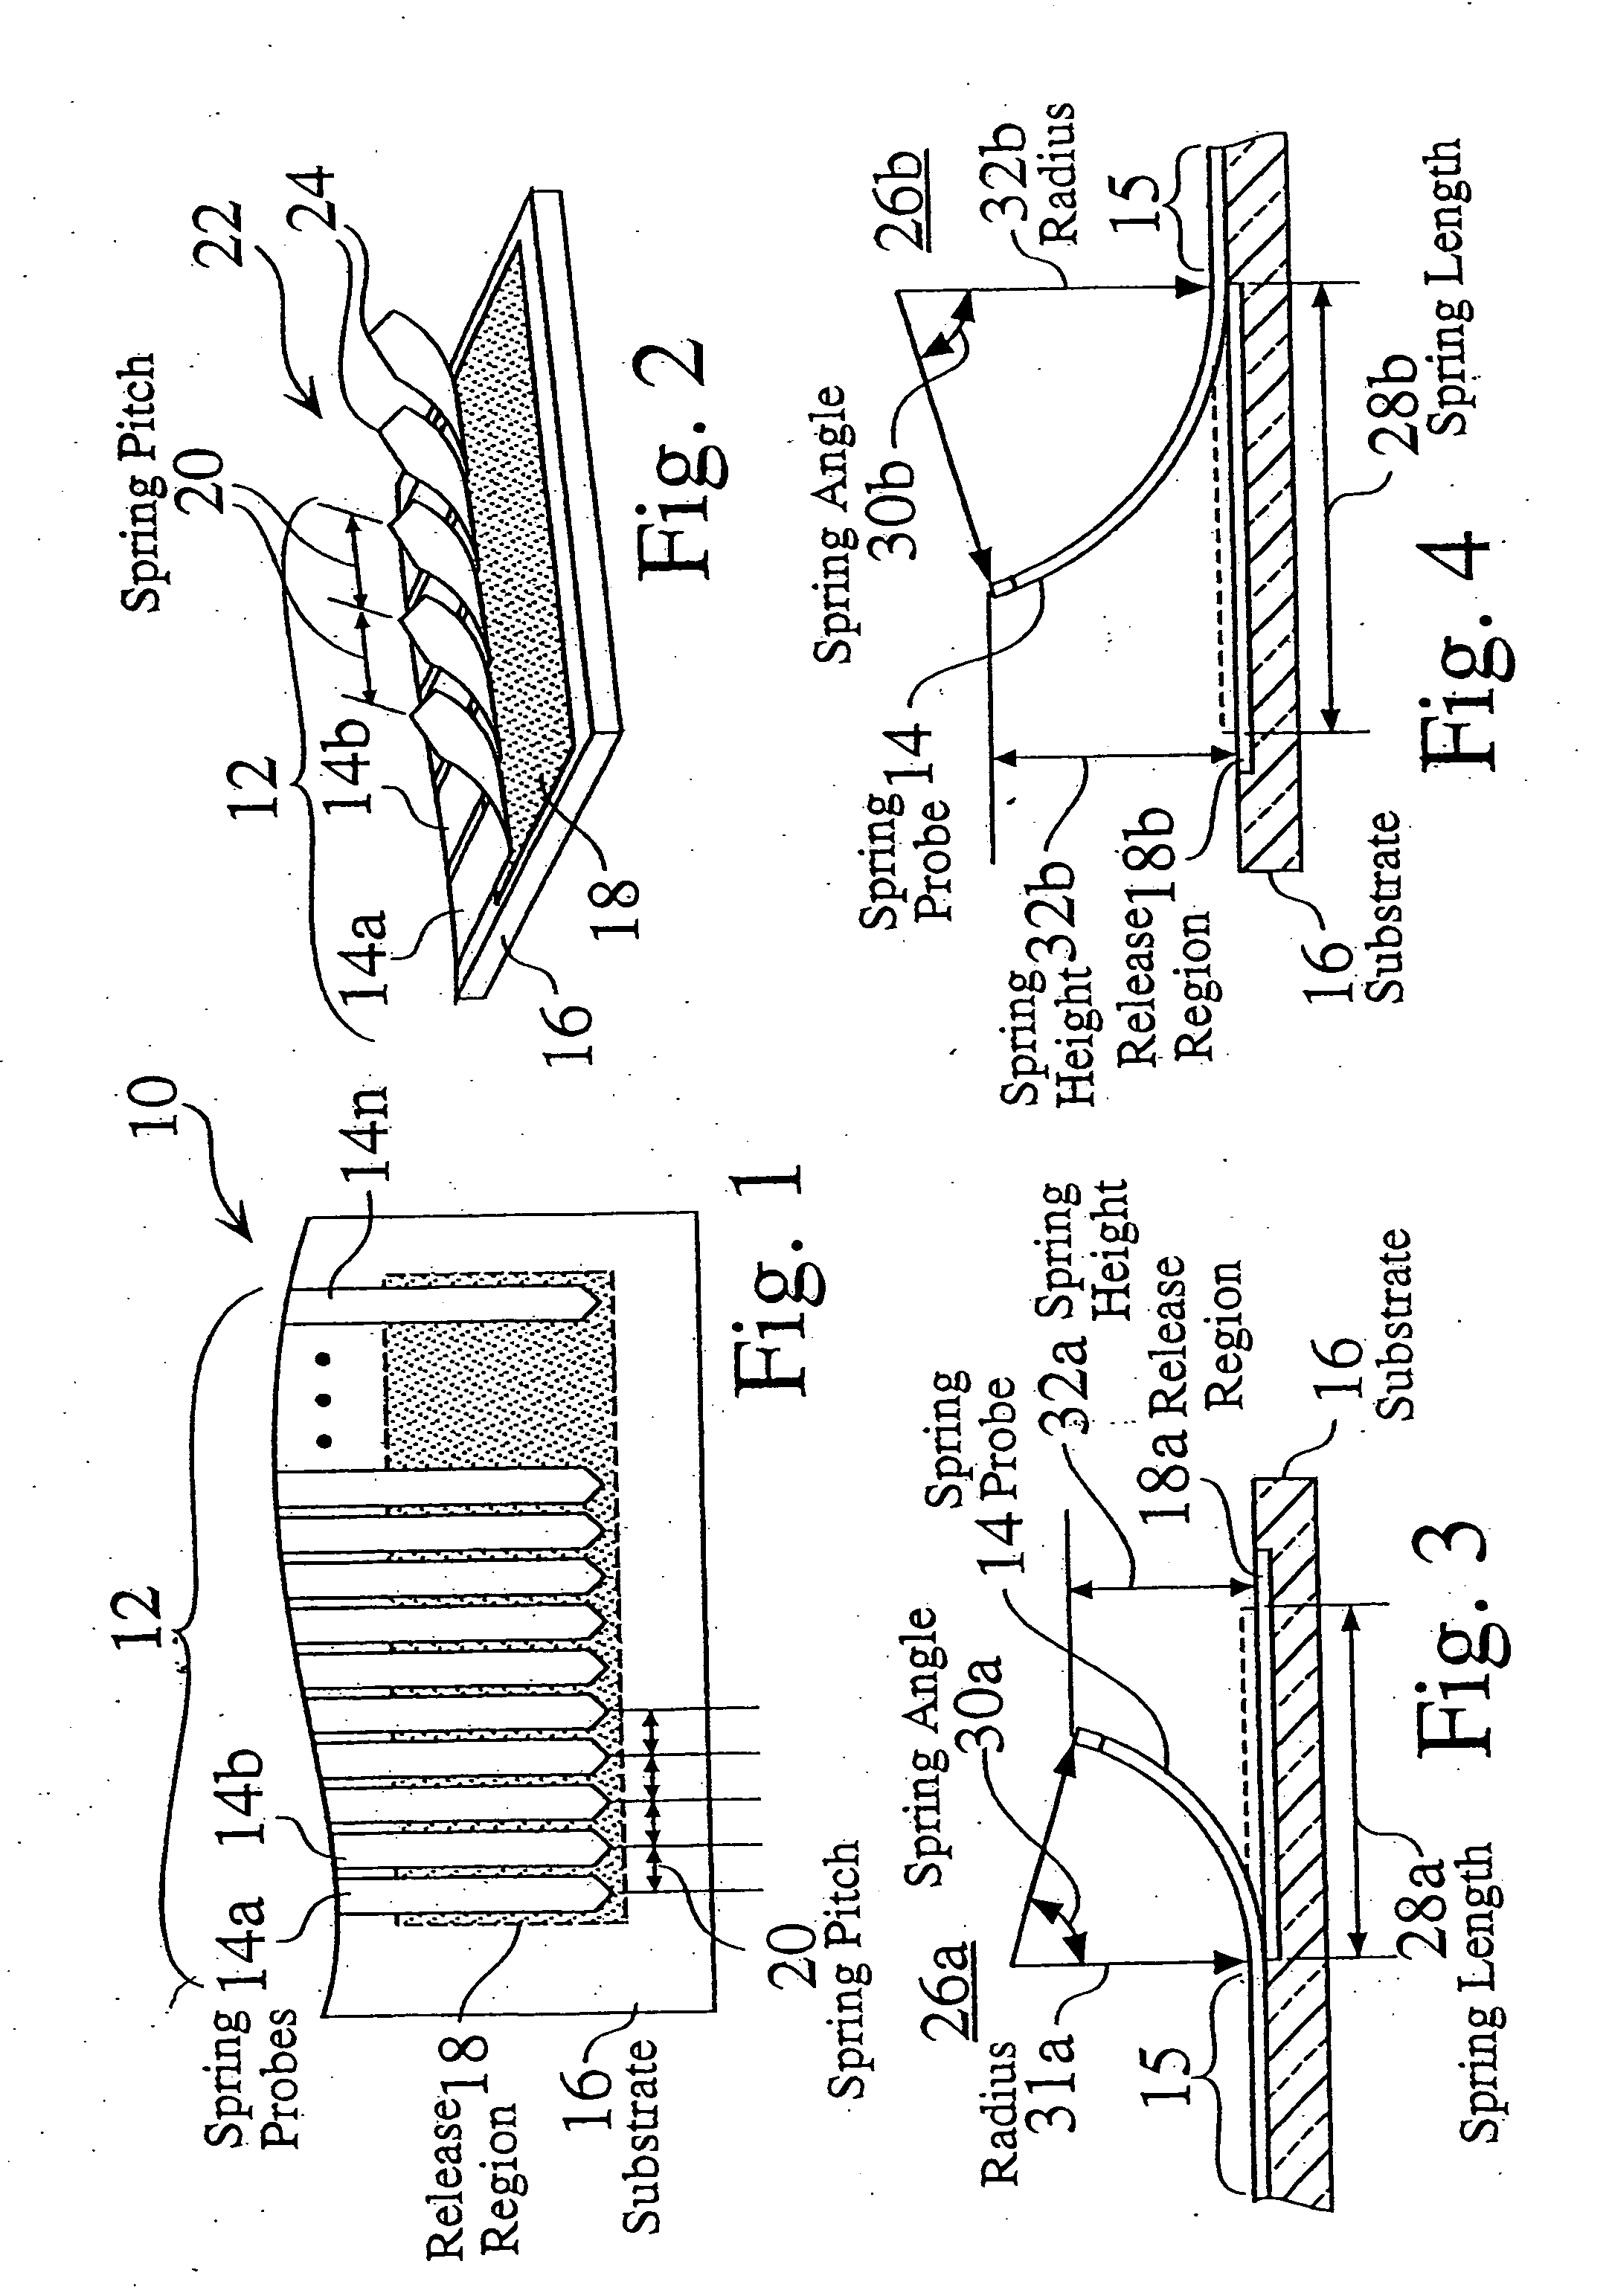 Construction structures and manufacturing processes for integrated circuit wafer probe card assemblies